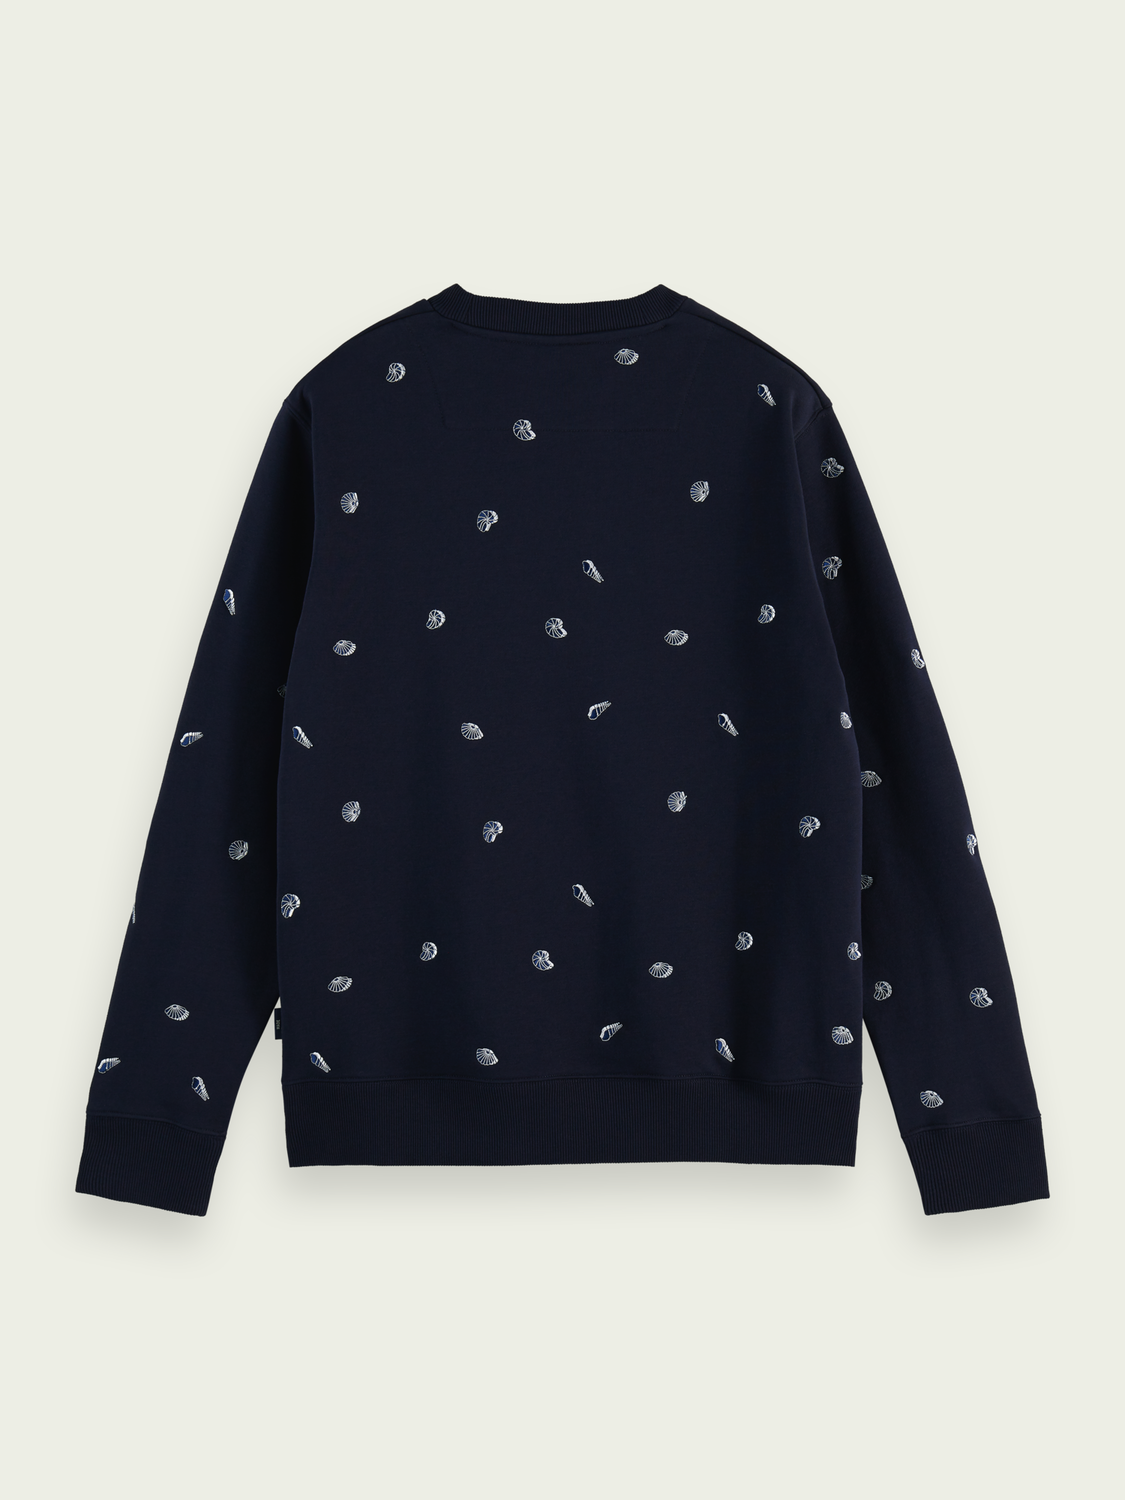 All-over Embroidered Crewneck Sweat